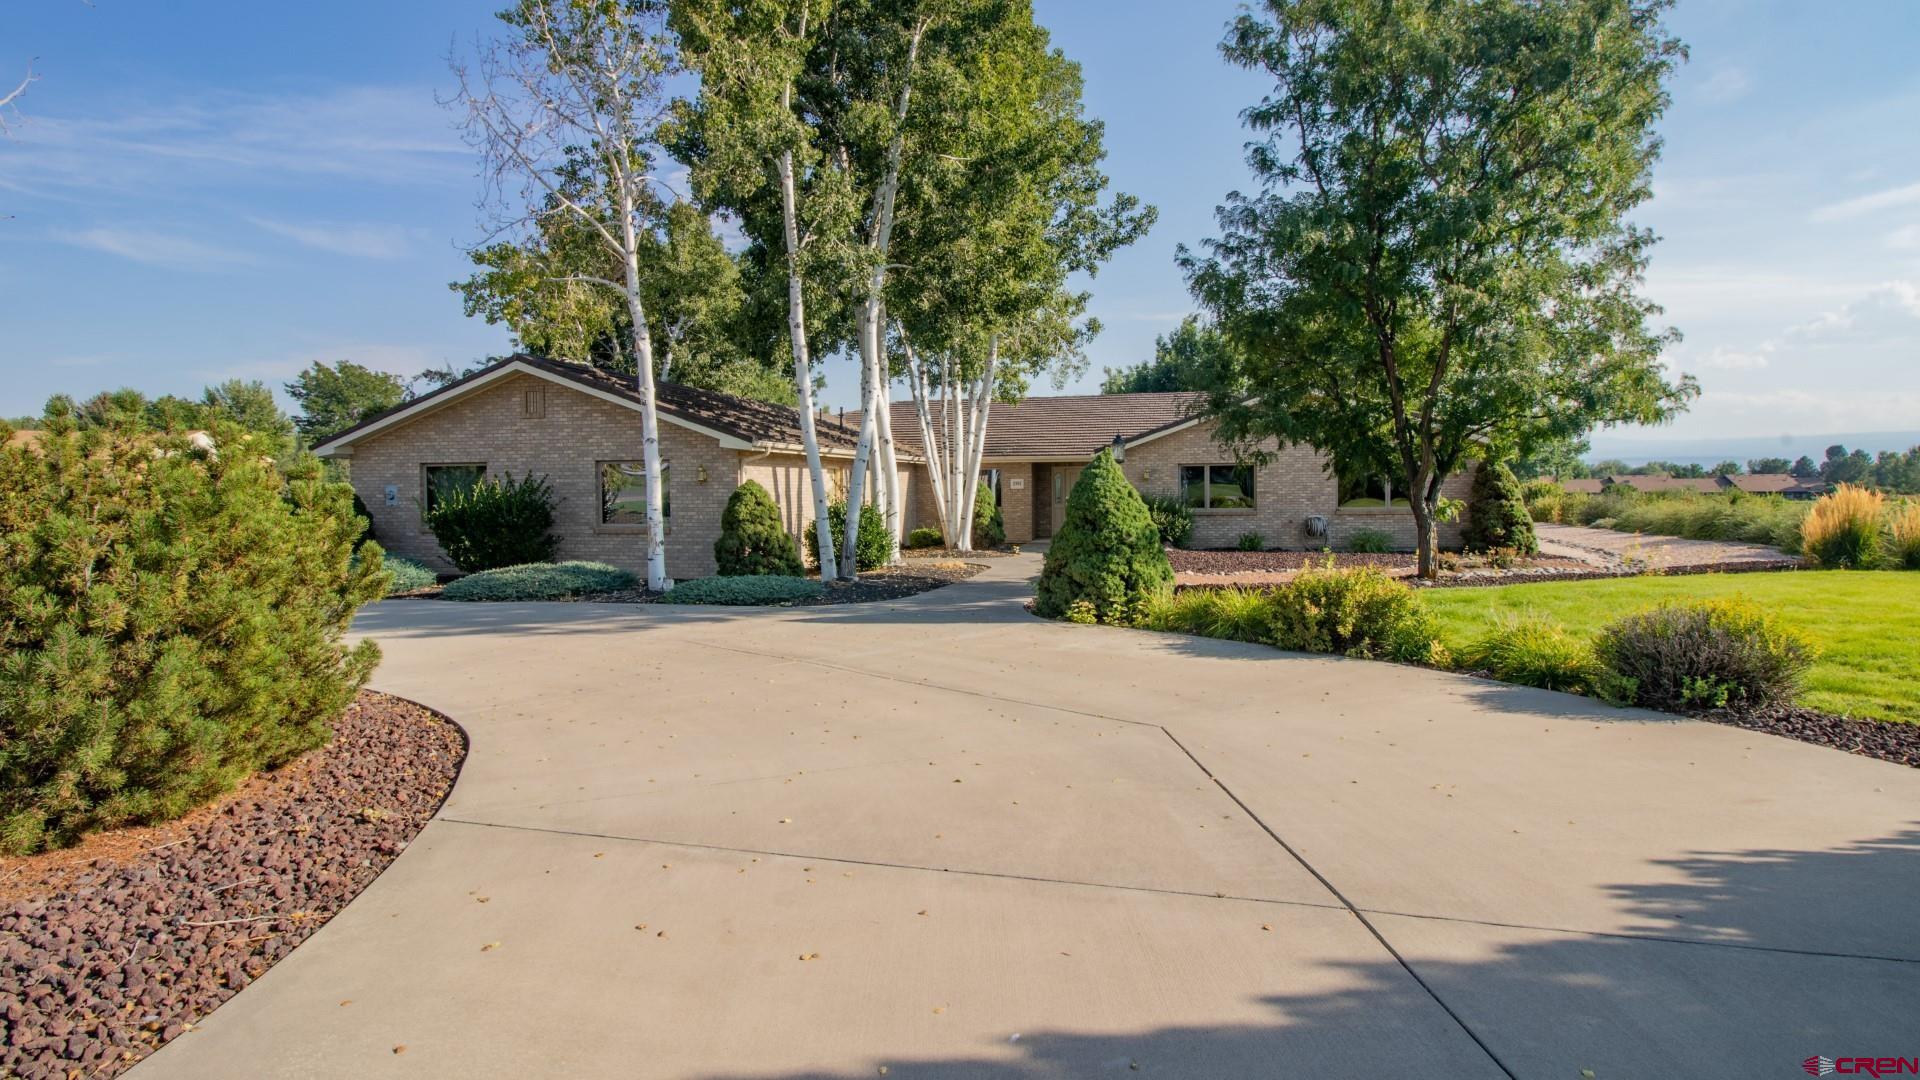 Beautiful custom home (3,339 sqft, 3BD/2.75BA) bordering the 18th-fairway of the Black Canyon Golf Course. Enjoy the manicured green space off your back patios along with mountain views. Need space to breath? Add in the .85-acre landscaped, corner lot that provides covetous space compared to other golf communities. Top it off with the freedom of no restrictive HOA or HOA fees. Immaculately cared for home has been the private retreat of one owner. Spacious, open kitchen and living area with custom oak cabinetry, two ovens, granite counter tops, and hardwood floors. Oak cabinetry and hardwood doors throughout home. Need an office too? Bonus private office provides perfect home workspace. Step out to the spacious covered patio facing mountain and golf course scenery. Giant primary bedroom with deep walk-in closets as well as an additional southern-facing, walk-out patio. Professionally, irrigated landscape allows the entire property a beautifully peaceful setting. Large circle drive makes visitor access a breeze. Bonus 14-month, home warranty covering the appliances along with the heating, electrical, and plumbing systems. Come tour this beauty and find yourself a little piece of paradise.